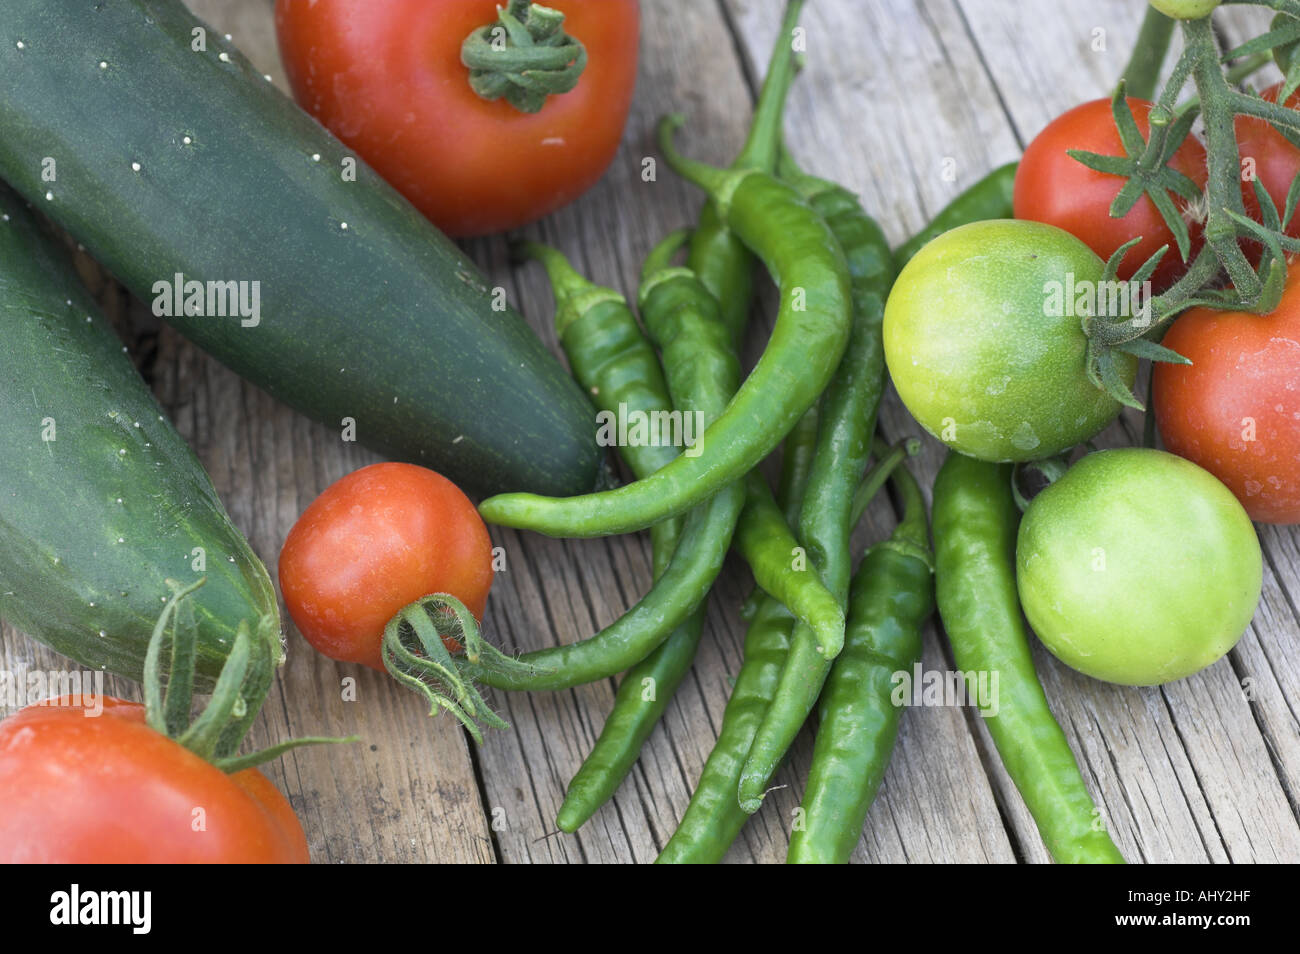 Freshly picked Home grown organic tomatoes cucumber and green chillis with rustic trug on weathered garden table UK August Stock Photo